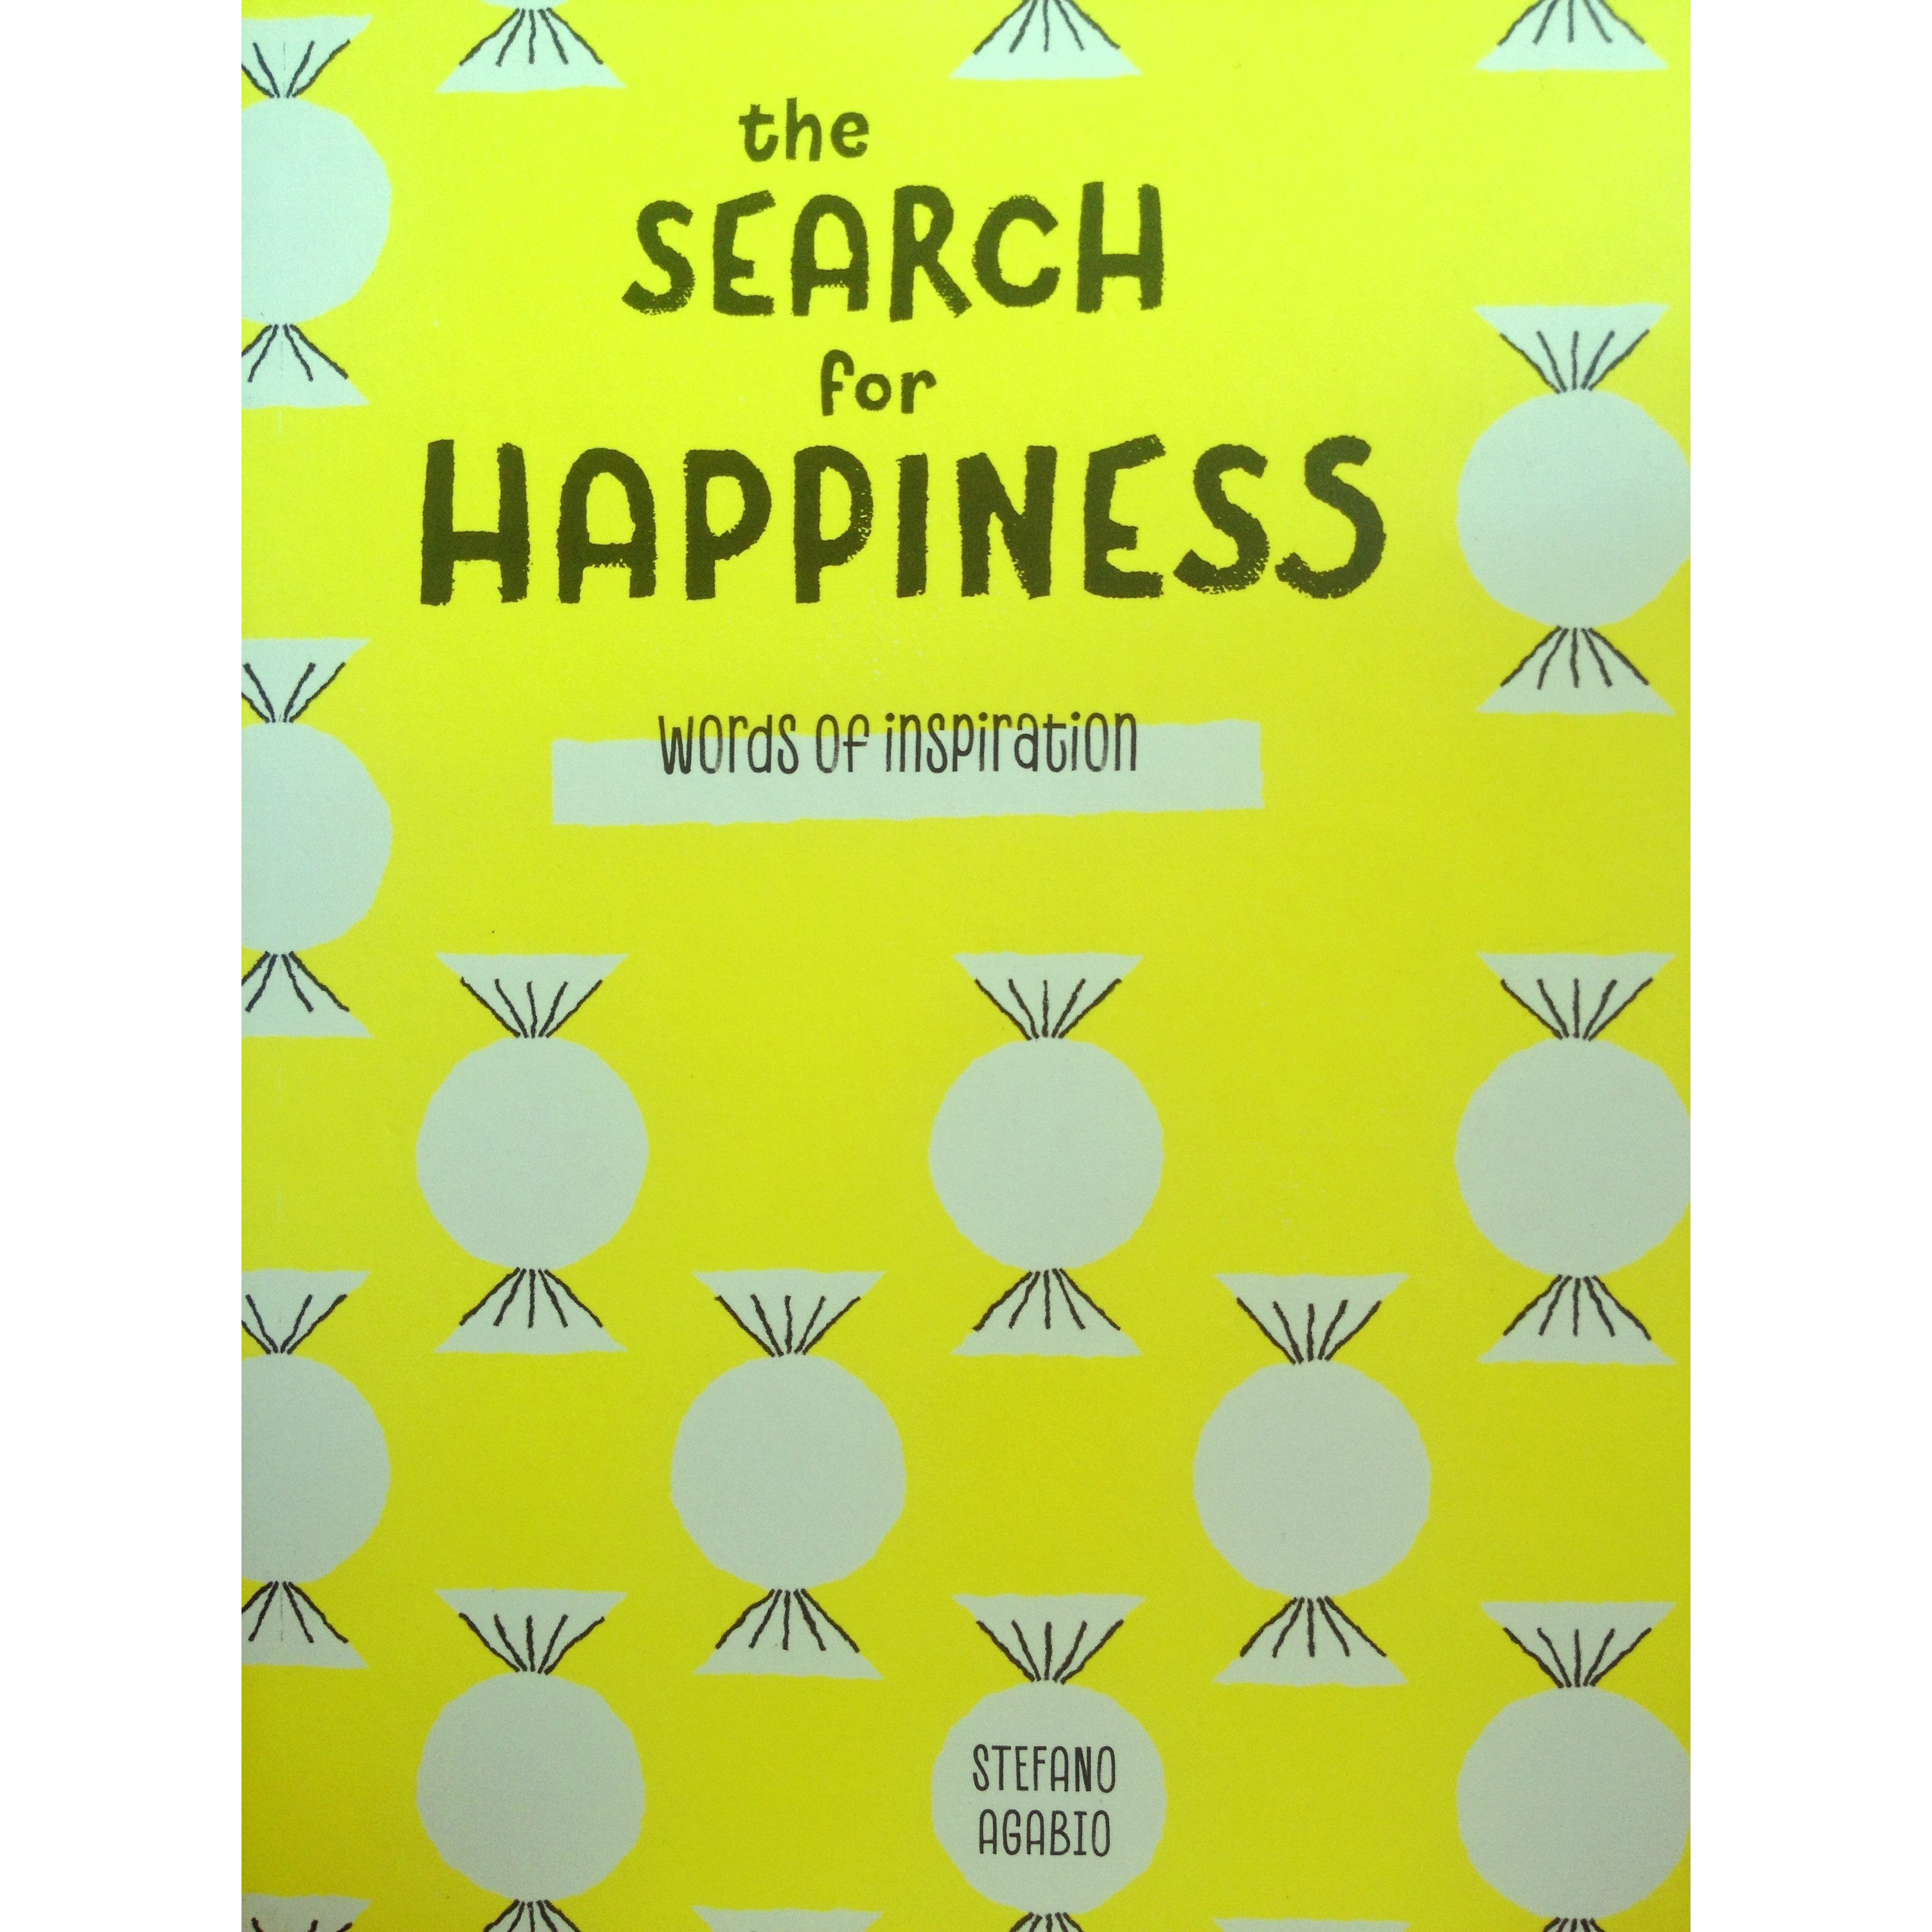 Words of Inspiration: The Search for Happiness | Studio Ianus